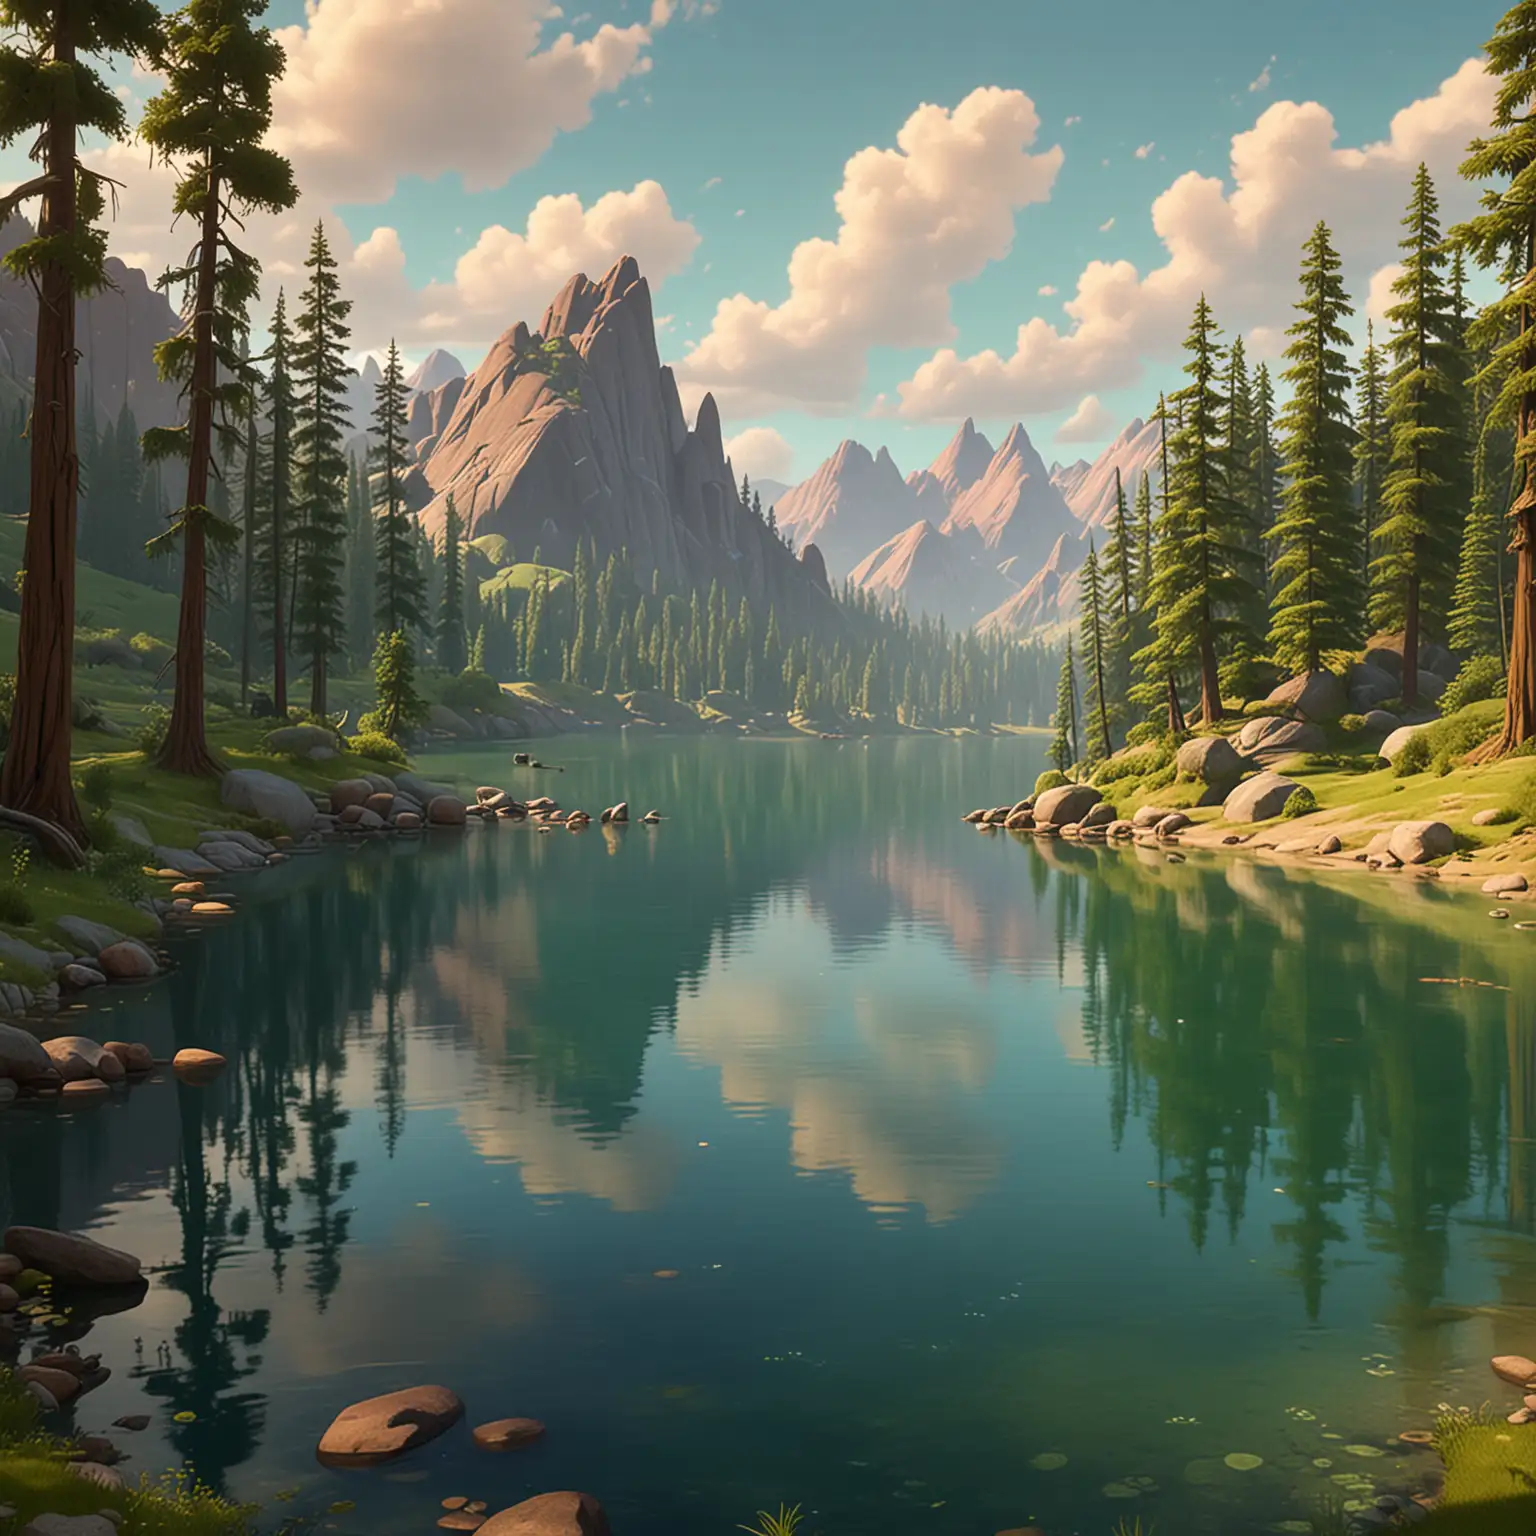 lake with hills and trees  pixar style
